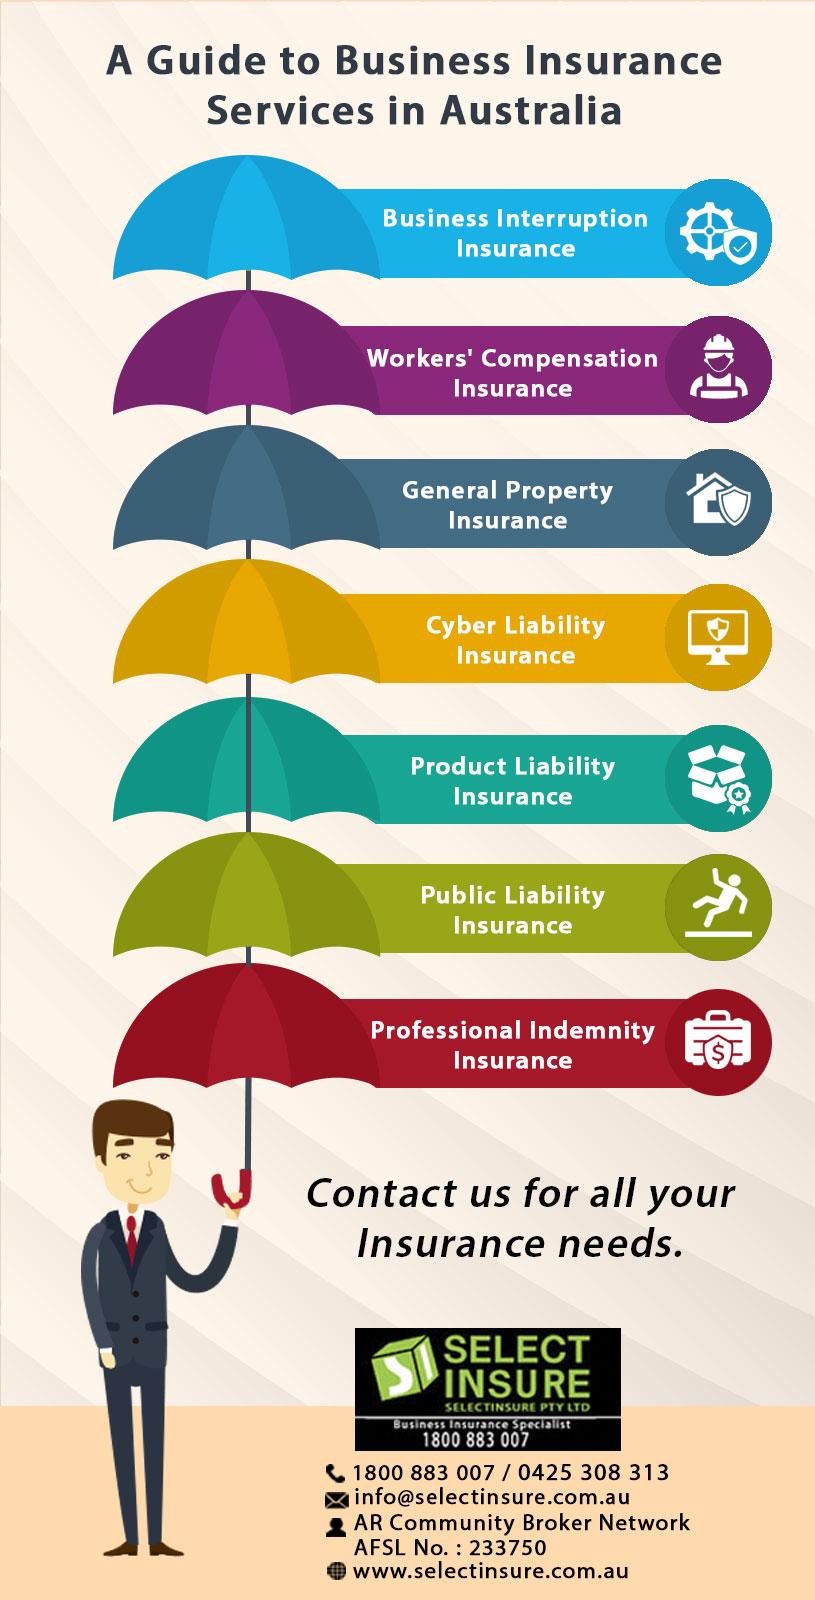 A Guide to Business Insurance Services in Australia JustPaste.it